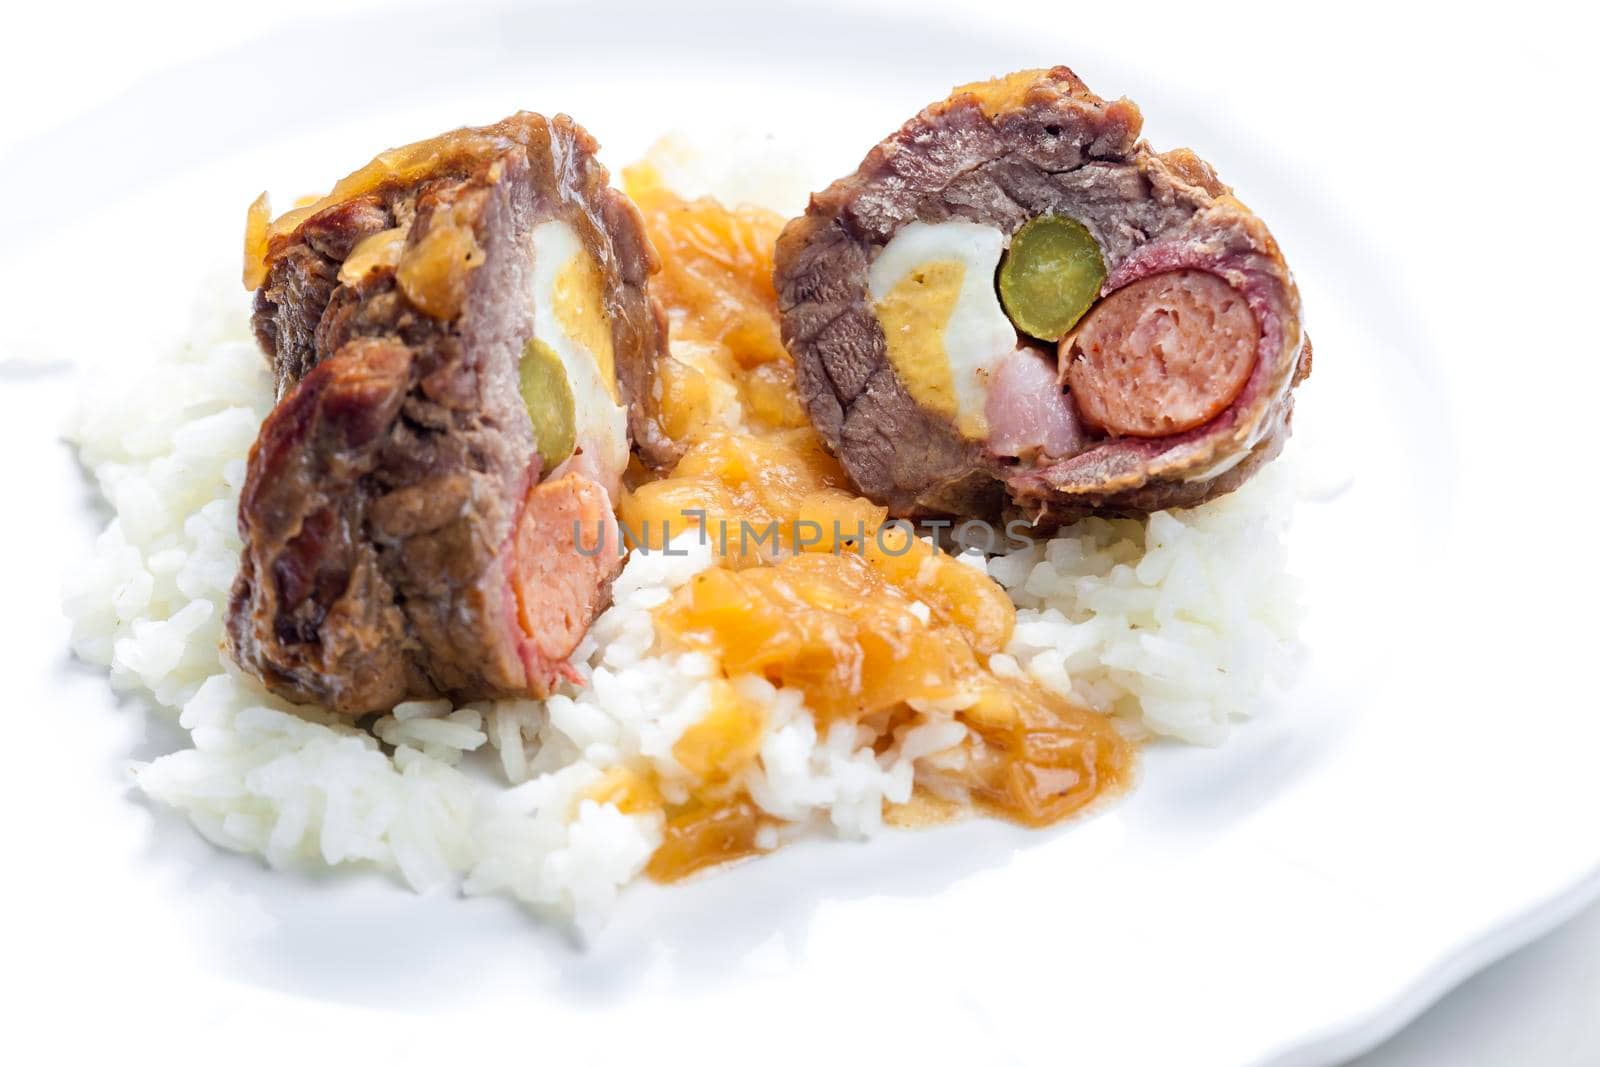 beef roulade filled with egg, sausage, bacon and prickle served with rice by phbcz